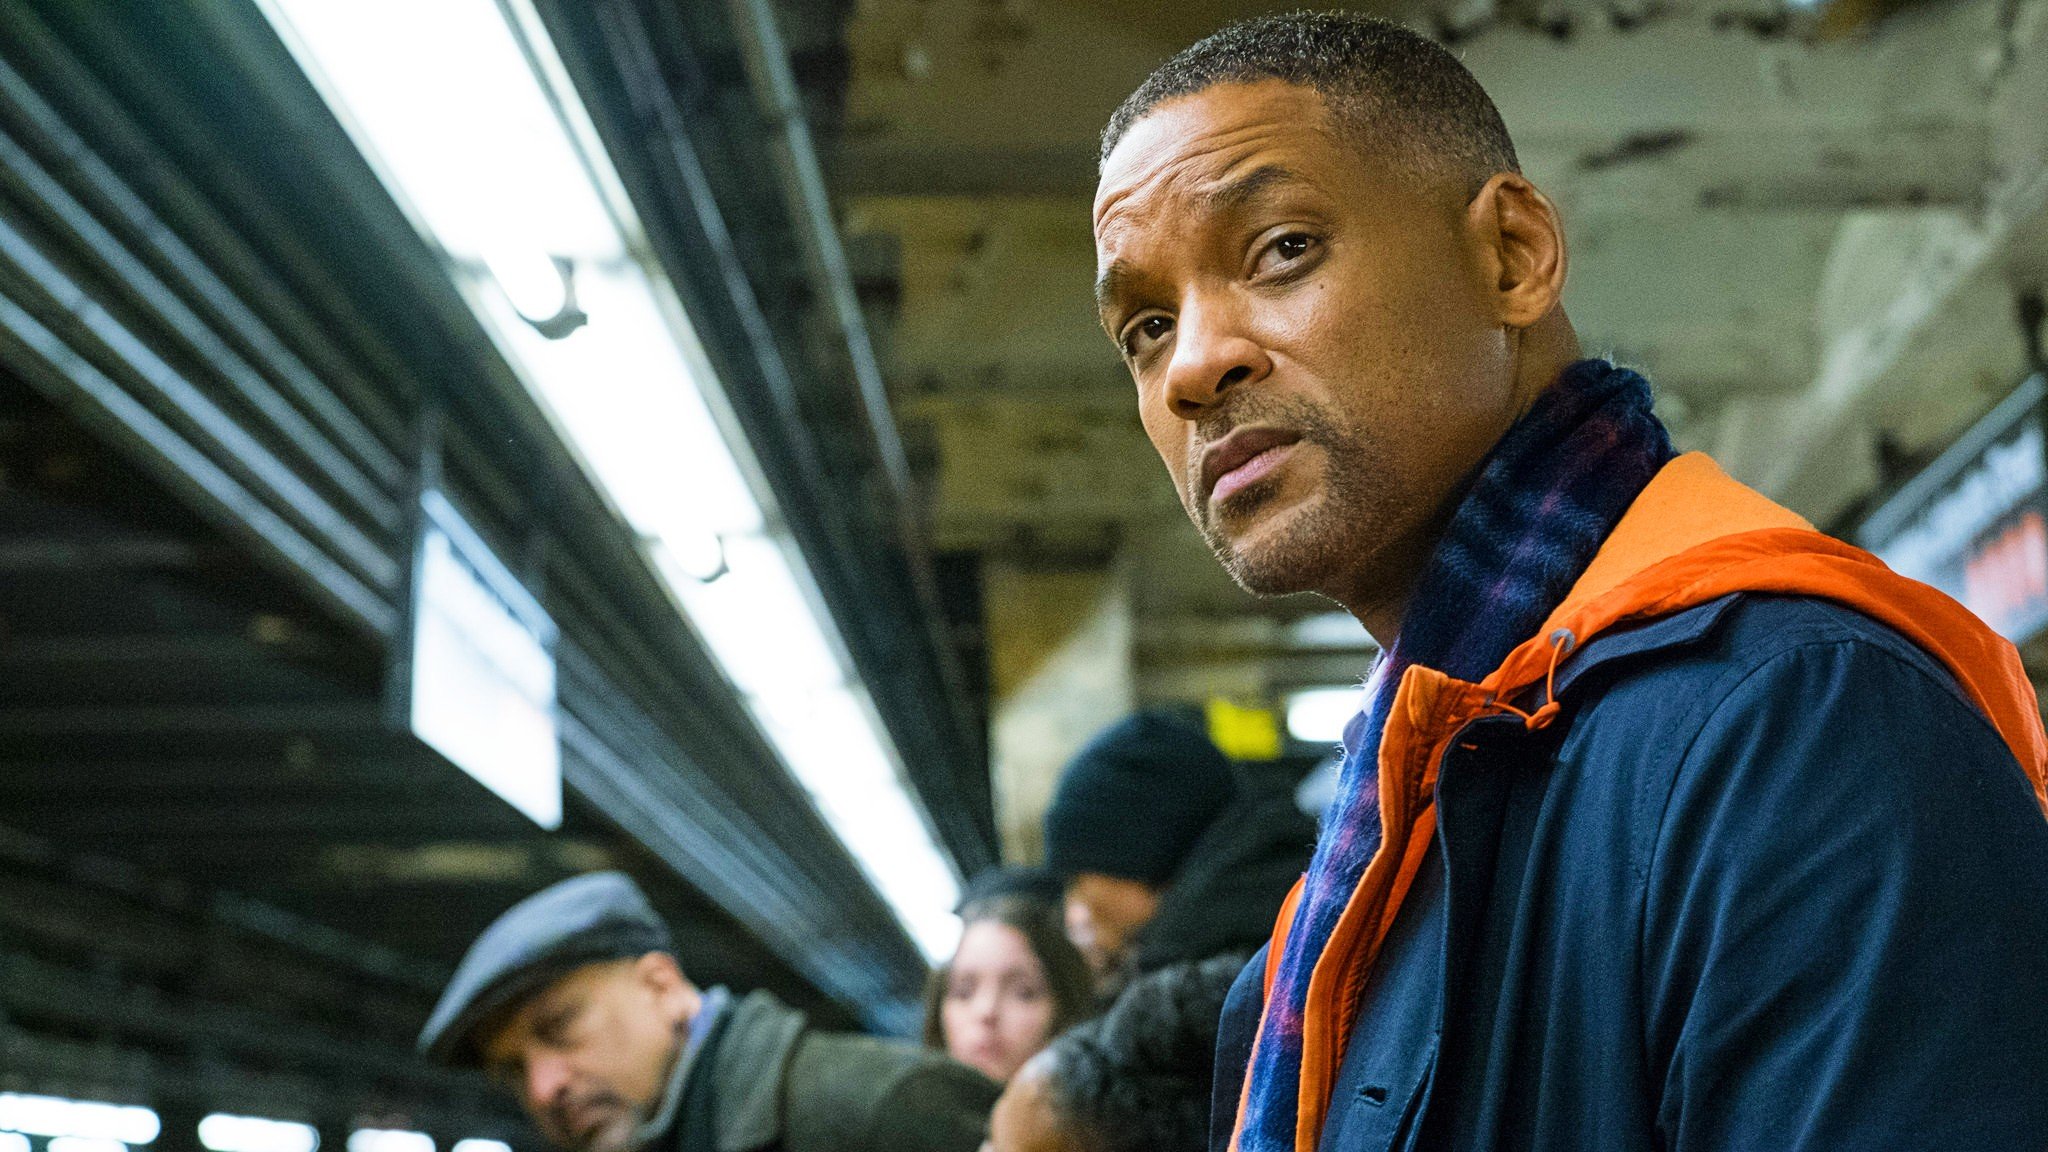 Exclusive: Will Smith In Talks With Marvel But There's A Catch